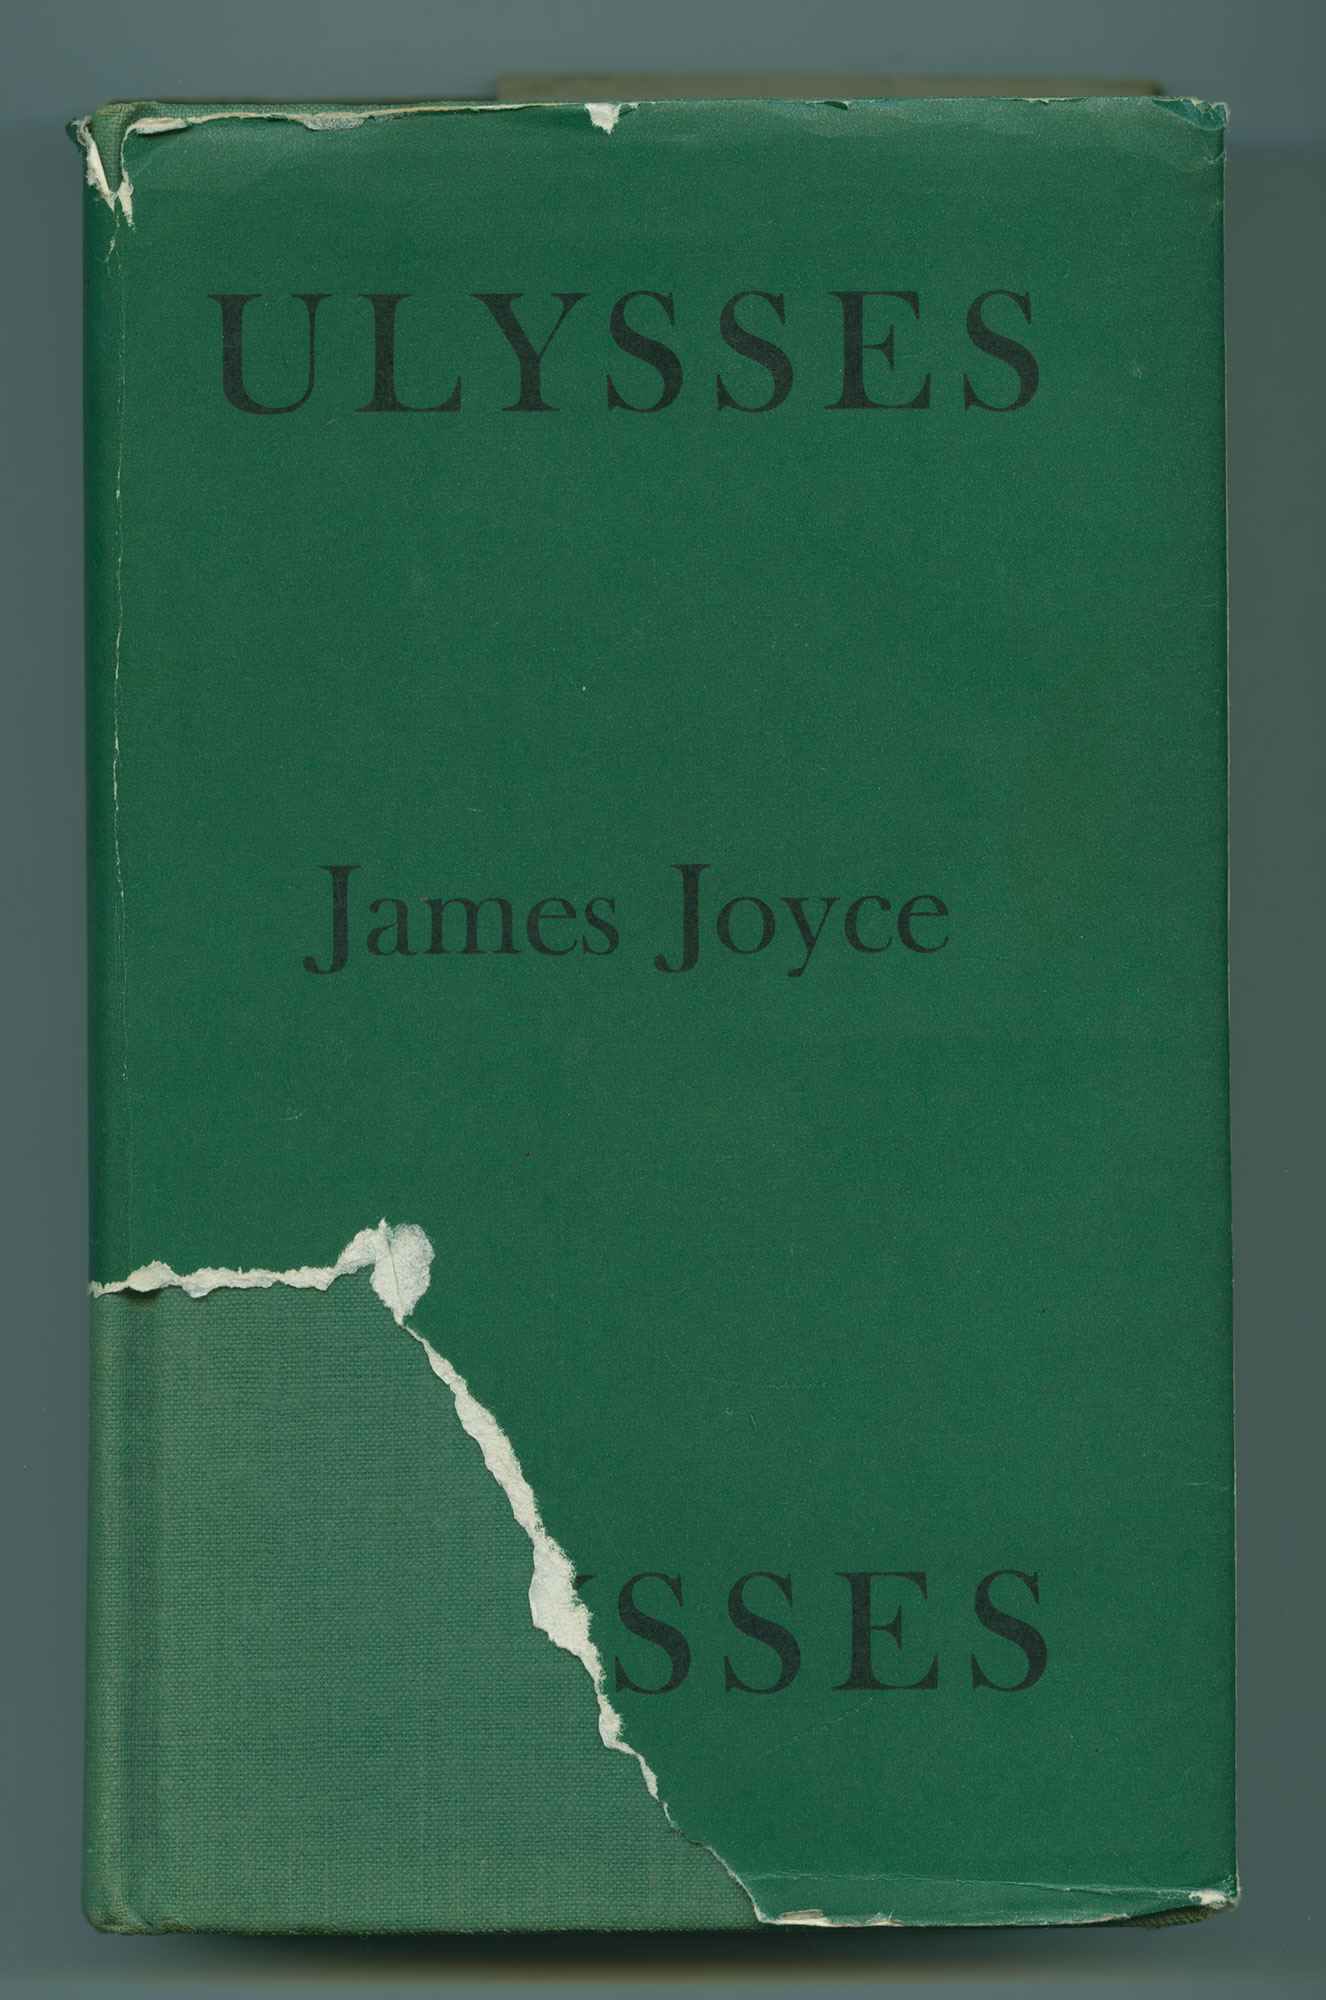 The cover of Ulysses partially torn, with black text on a green background